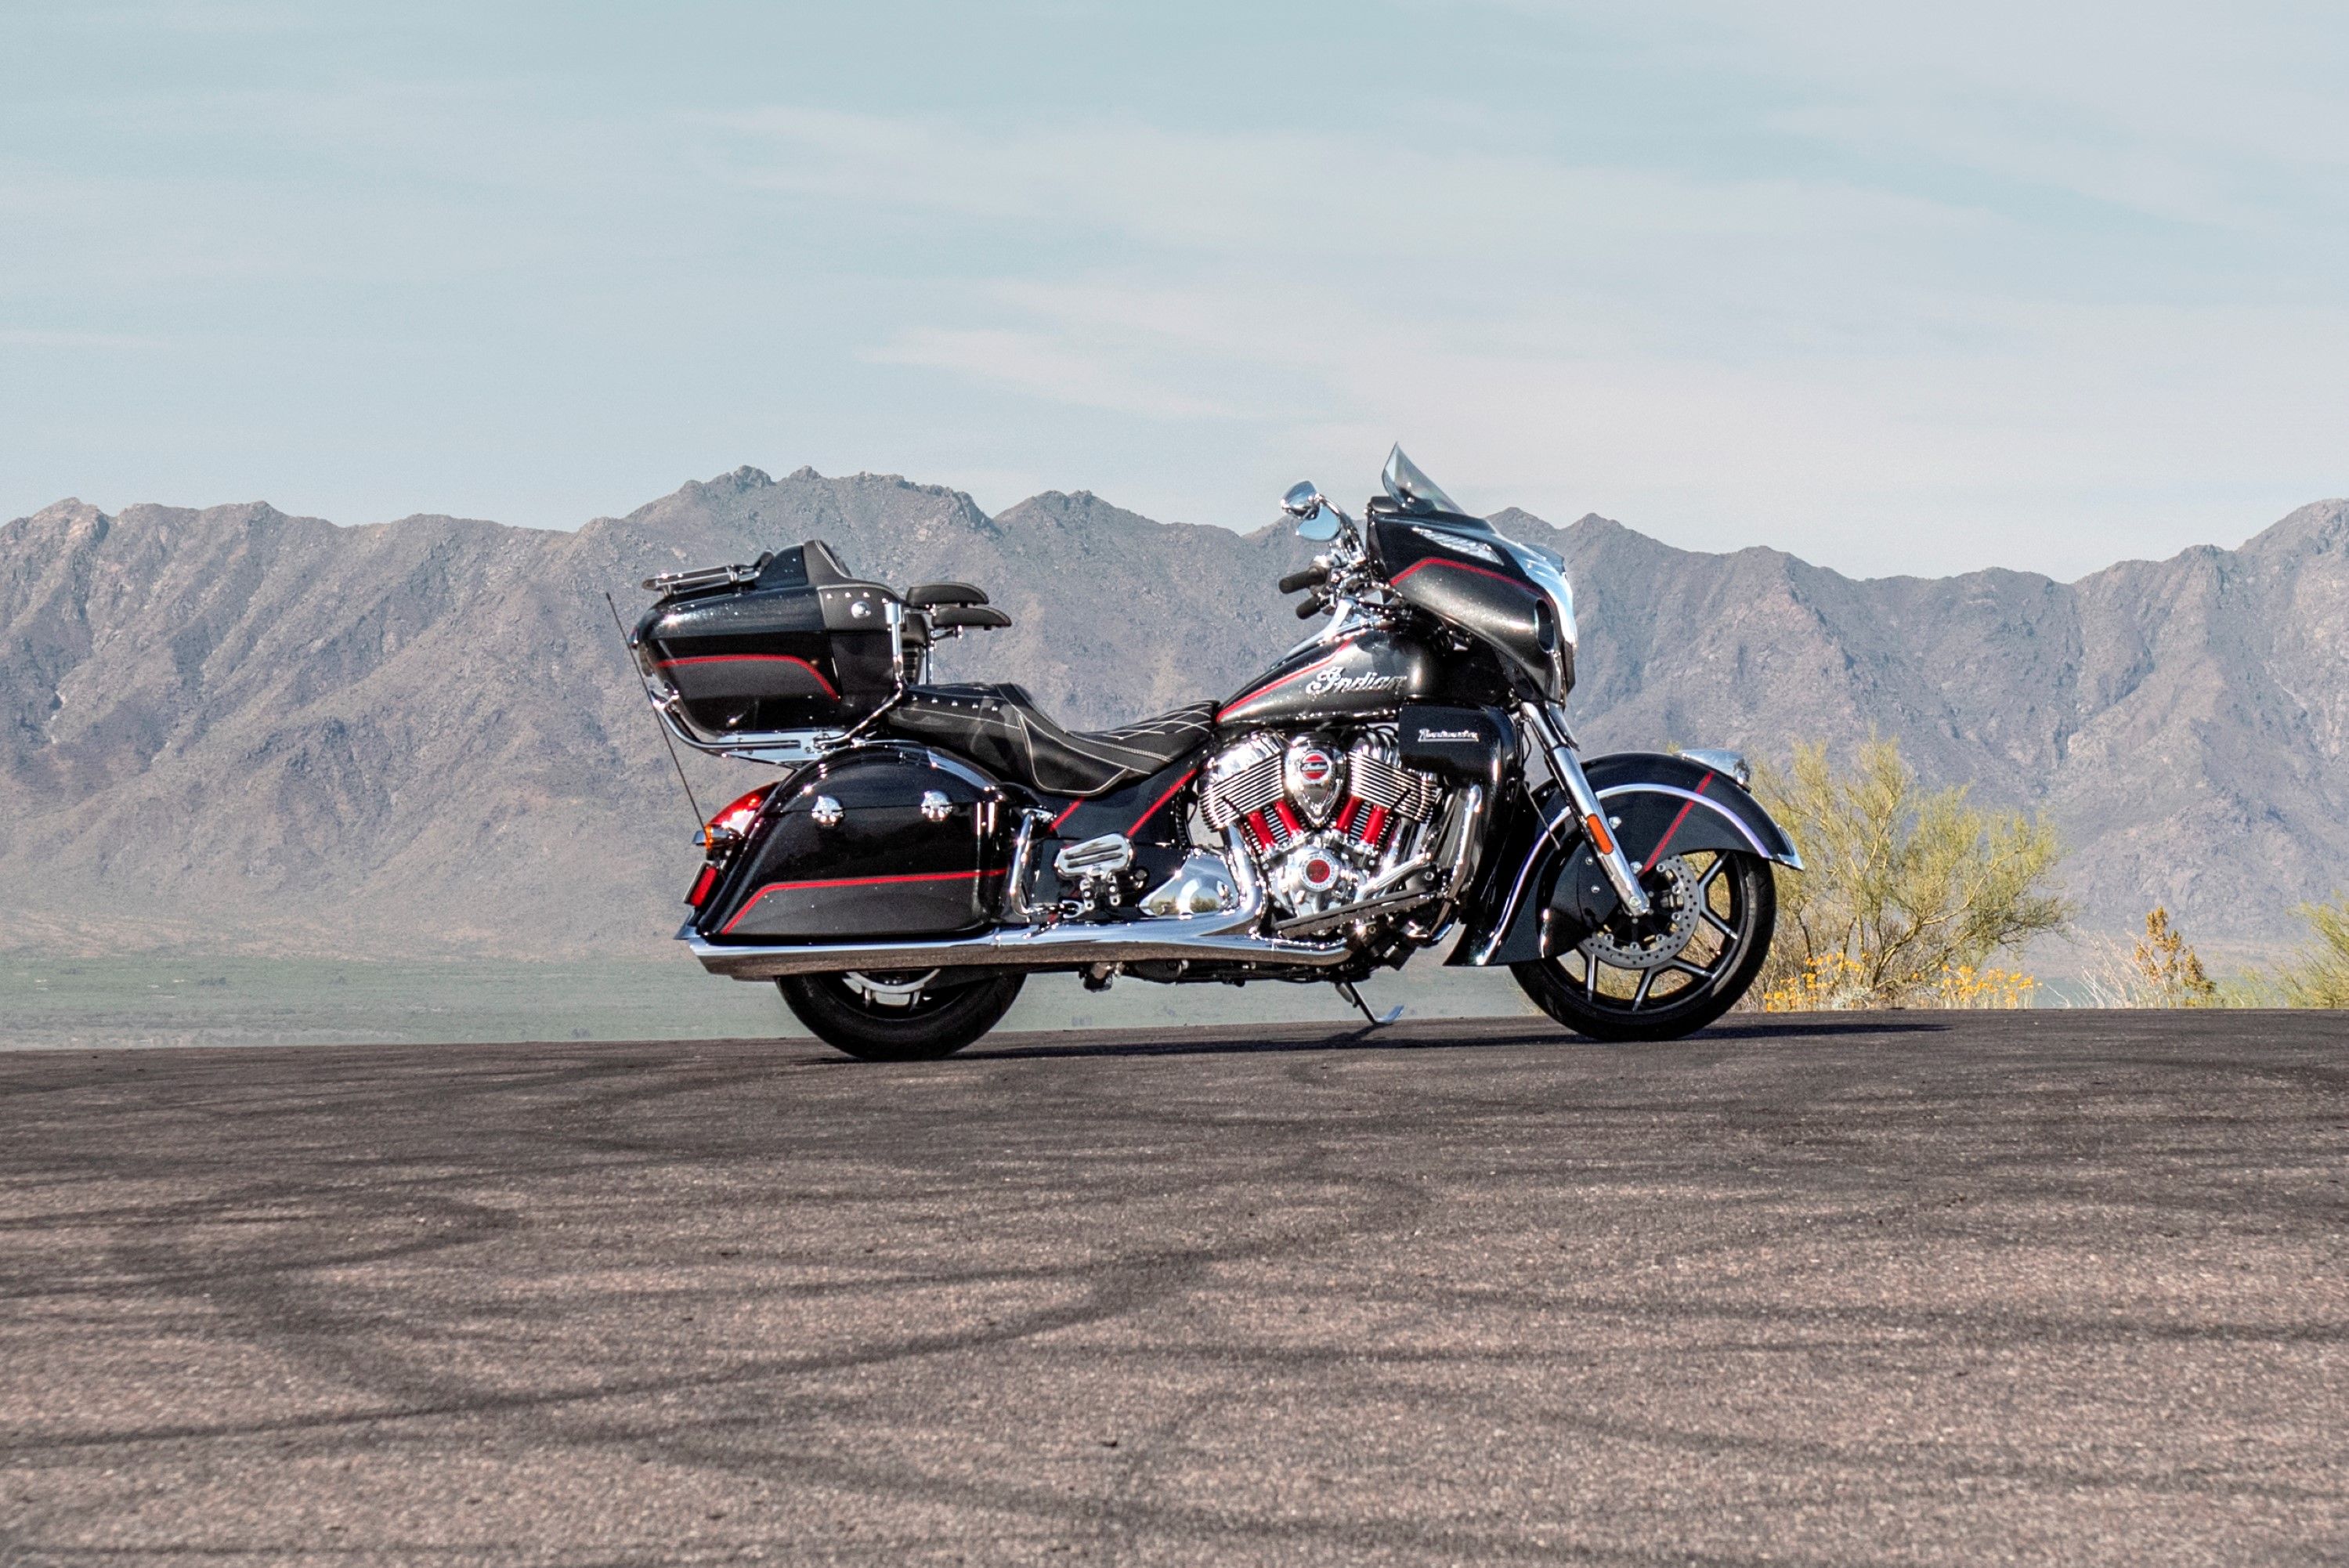 2017 - 2022 Indian Motorcycles brings in their flagship Roadmaster Elite with a new Paint Scheme for 2020